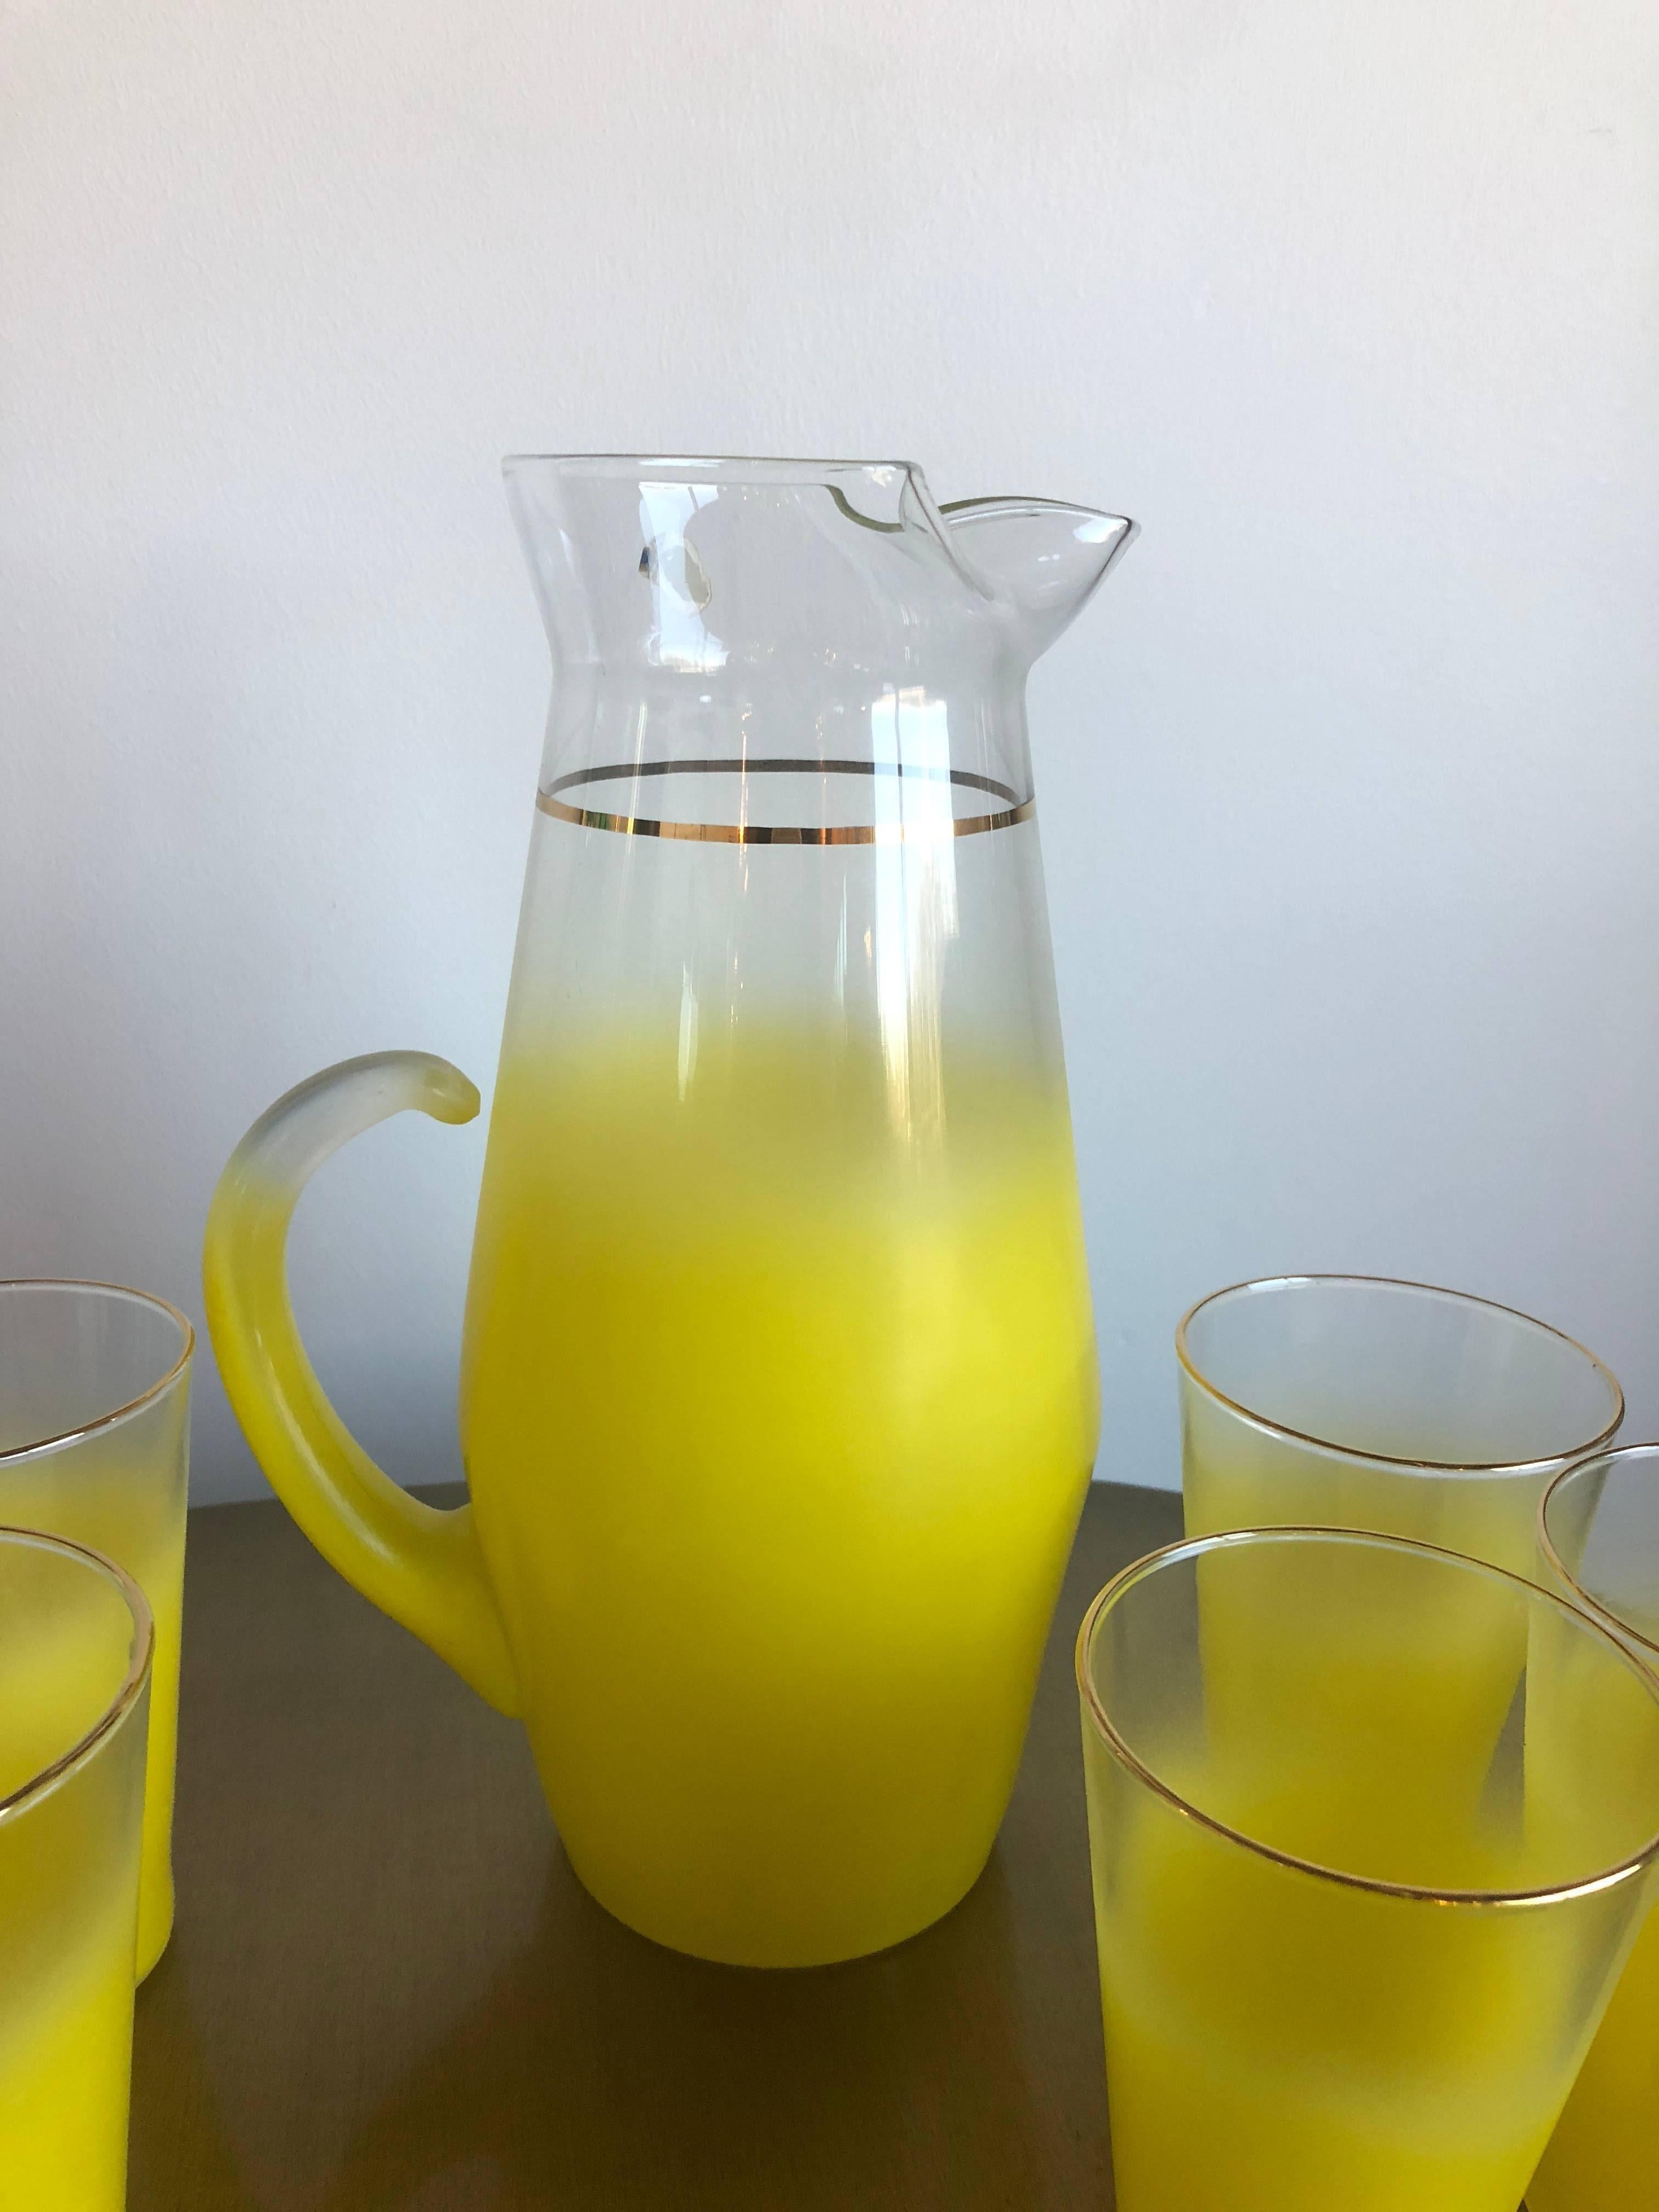 This cheerful beverage set produced by the West Virginia Glass Speciality Company between 1958 and 1974 features sprayed on yellow "Gala" pattern decoration and gold banding. Comprising a large pitcher (which retains the original factory